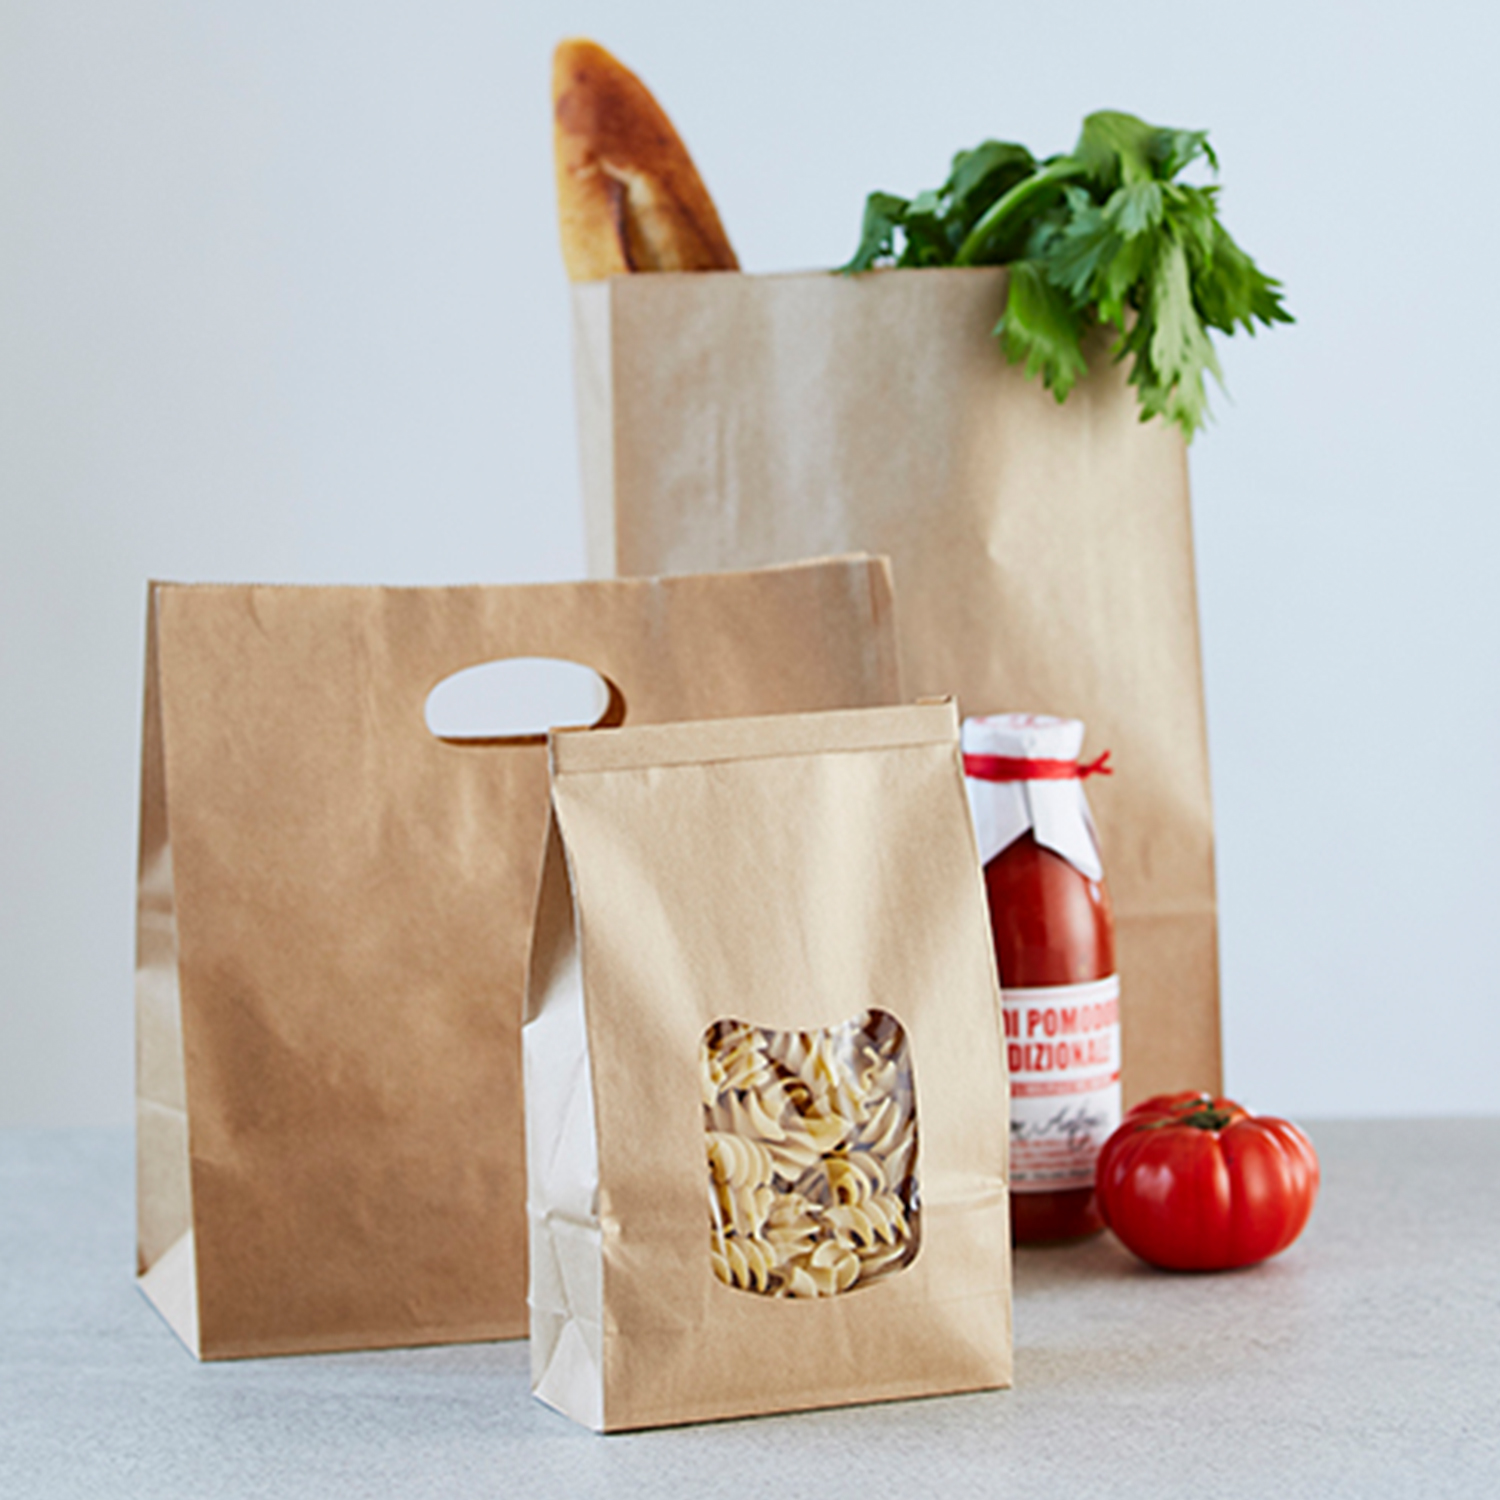 Image of three paper bags with groceries inside